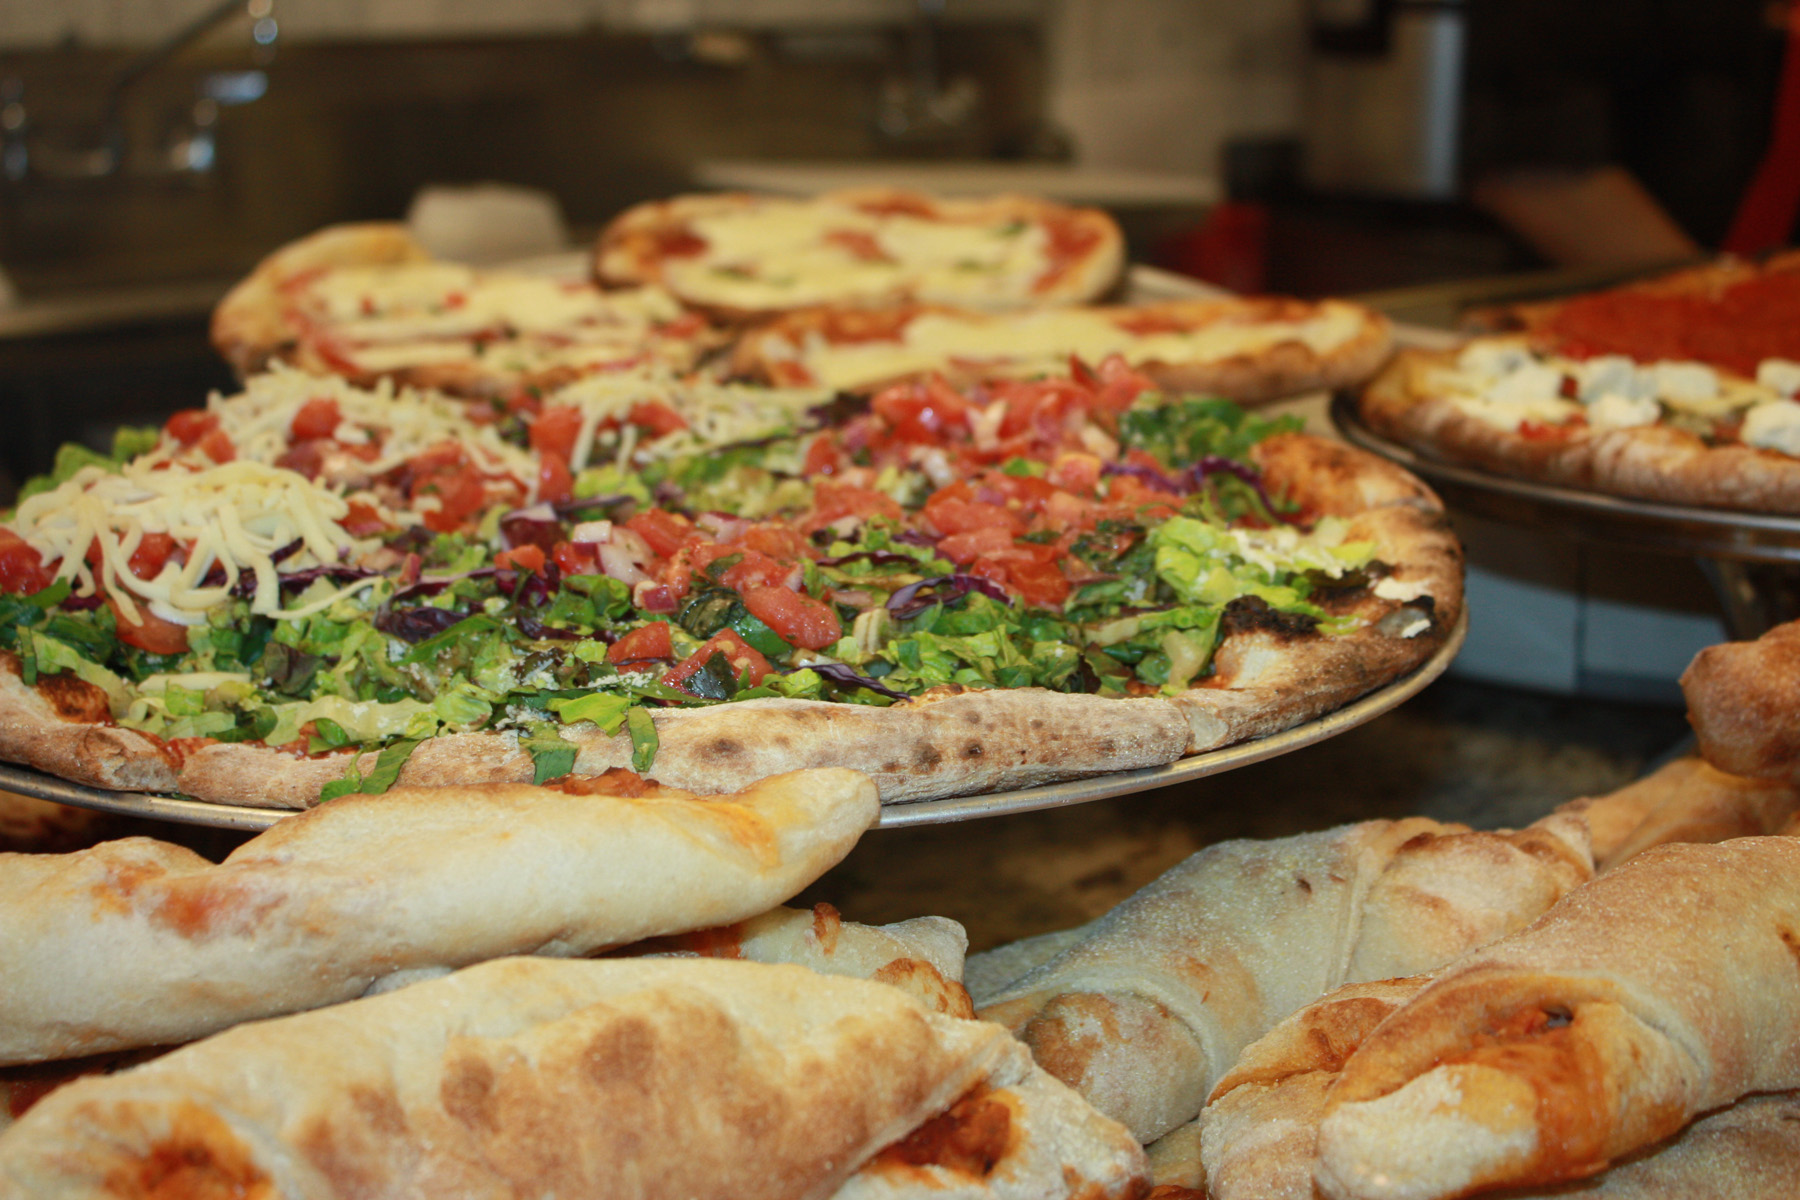 Specialty pizzas at DeCicco’s Family Market in Armonk